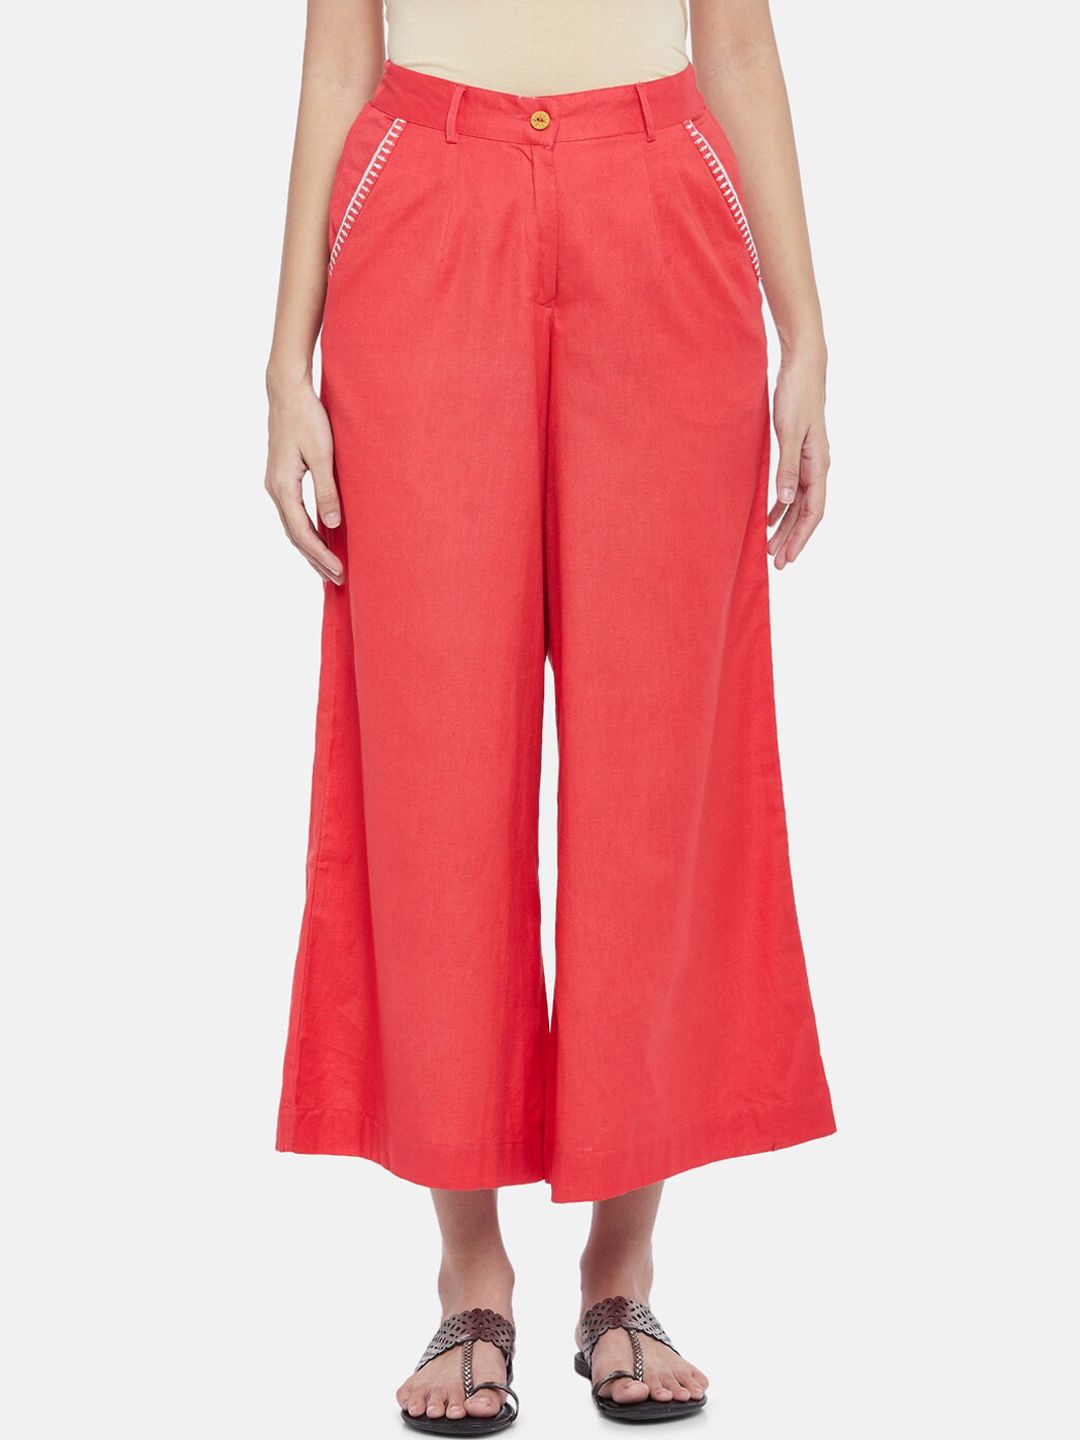 AKKRITI BY PANTALOONS Women Coral Pure Cotton Culottes Trousers Price in India